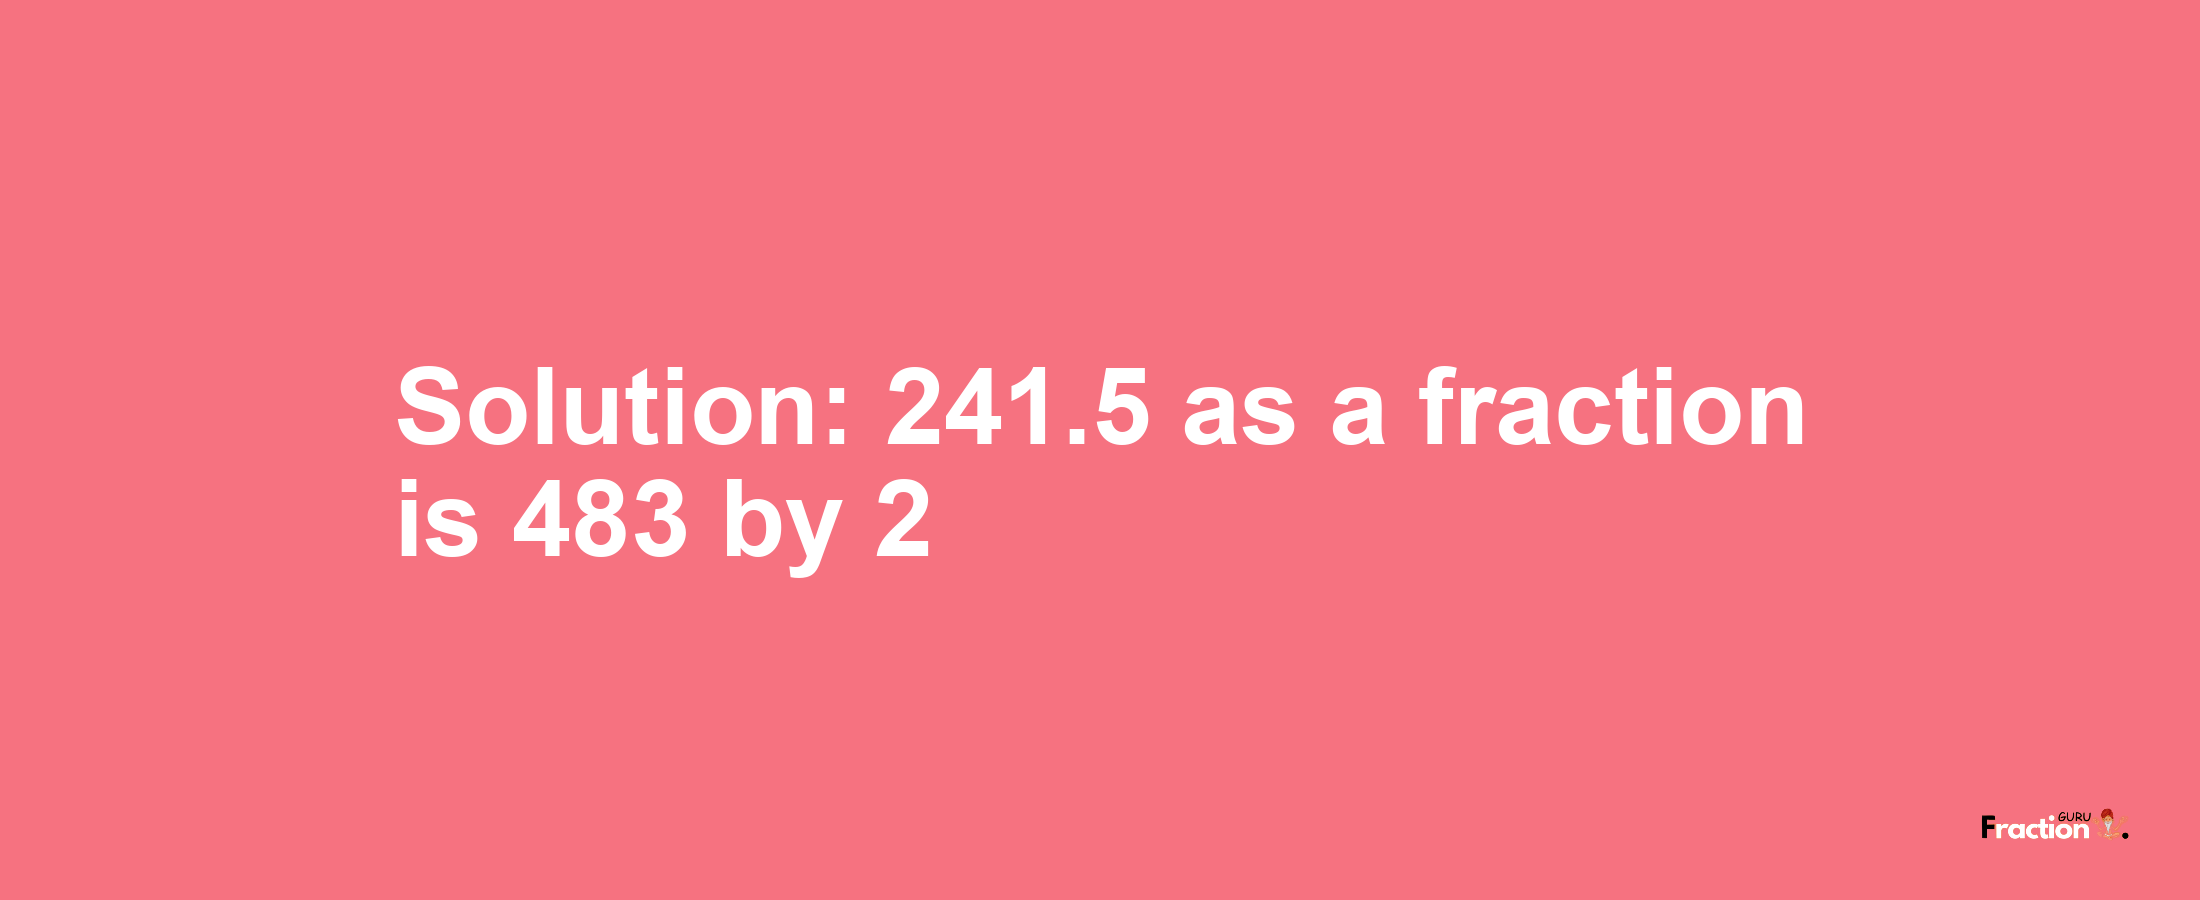 Solution:241.5 as a fraction is 483/2